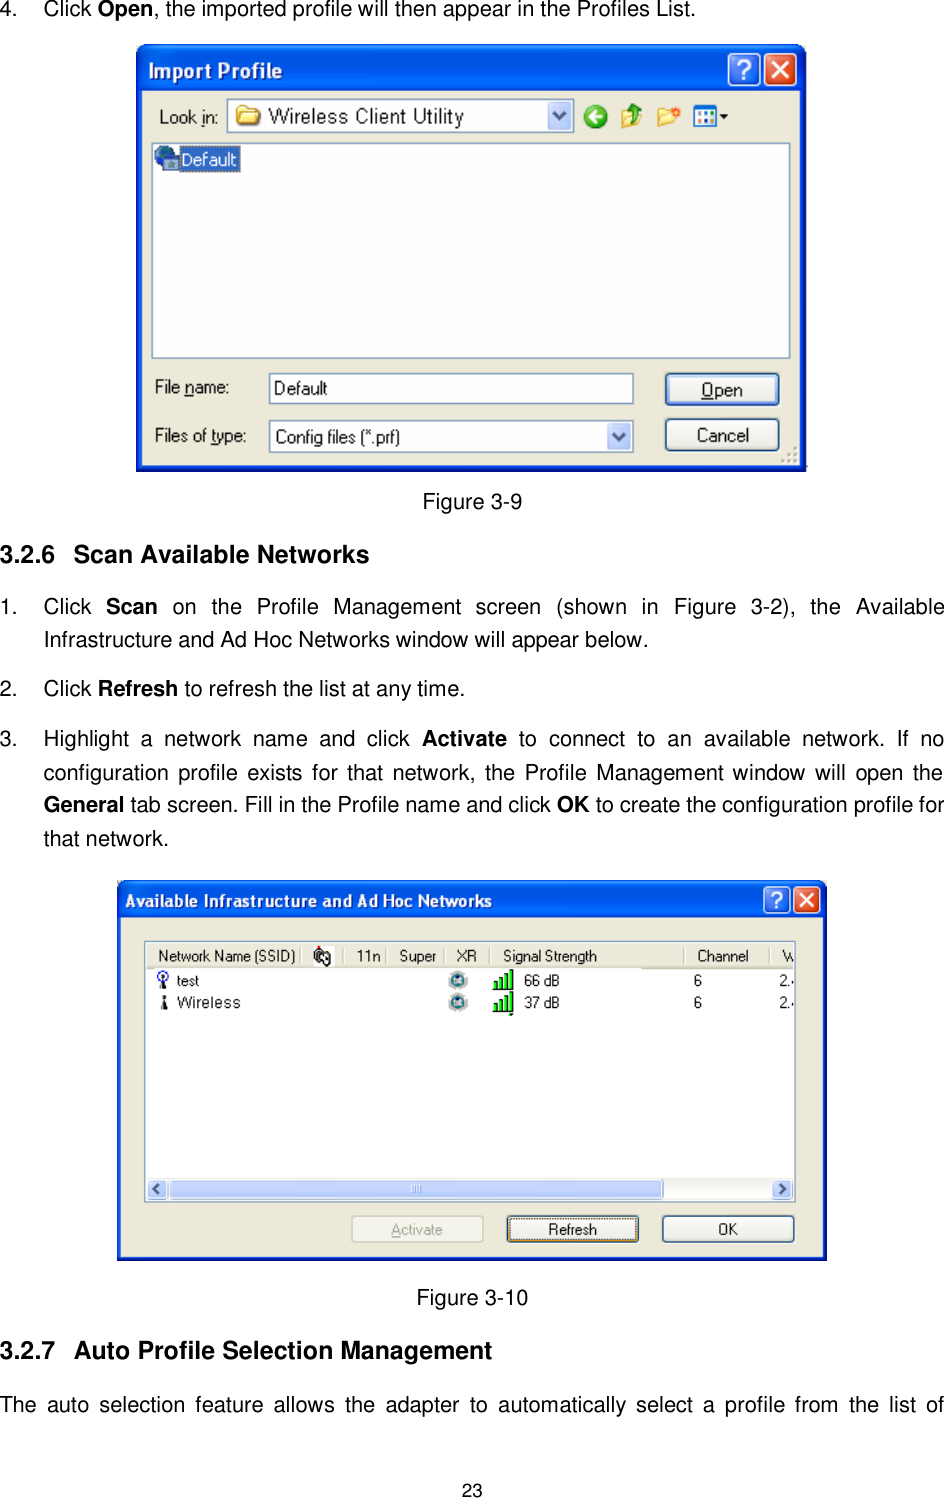  23 4.  Click Open, the imported profile will then appear in the Profiles List.  Figure 3-9 3.2.6  Scan Available Networks 1.  Click  Scan  on  the  Profile  Management  screen  (shown  in  XFigure  3-2X),  the  Available Infrastructure and Ad Hoc Networks window will appear below. 2.  Click Refresh to refresh the list at any time. 3.  Highlight  a  network  name  and  click  Activate  to  connect  to  an  available  network.  If  no configuration  profile exists  for that network,  the Profile Management window will  open the General tab screen. Fill in the Profile name and click OK to create the configuration profile for that network.  Figure 3-10 3.2.7  Auto Profile Selection Management The  auto  selection feature  allows  the  adapter  to  automatically  select  a  profile from  the  list  of 